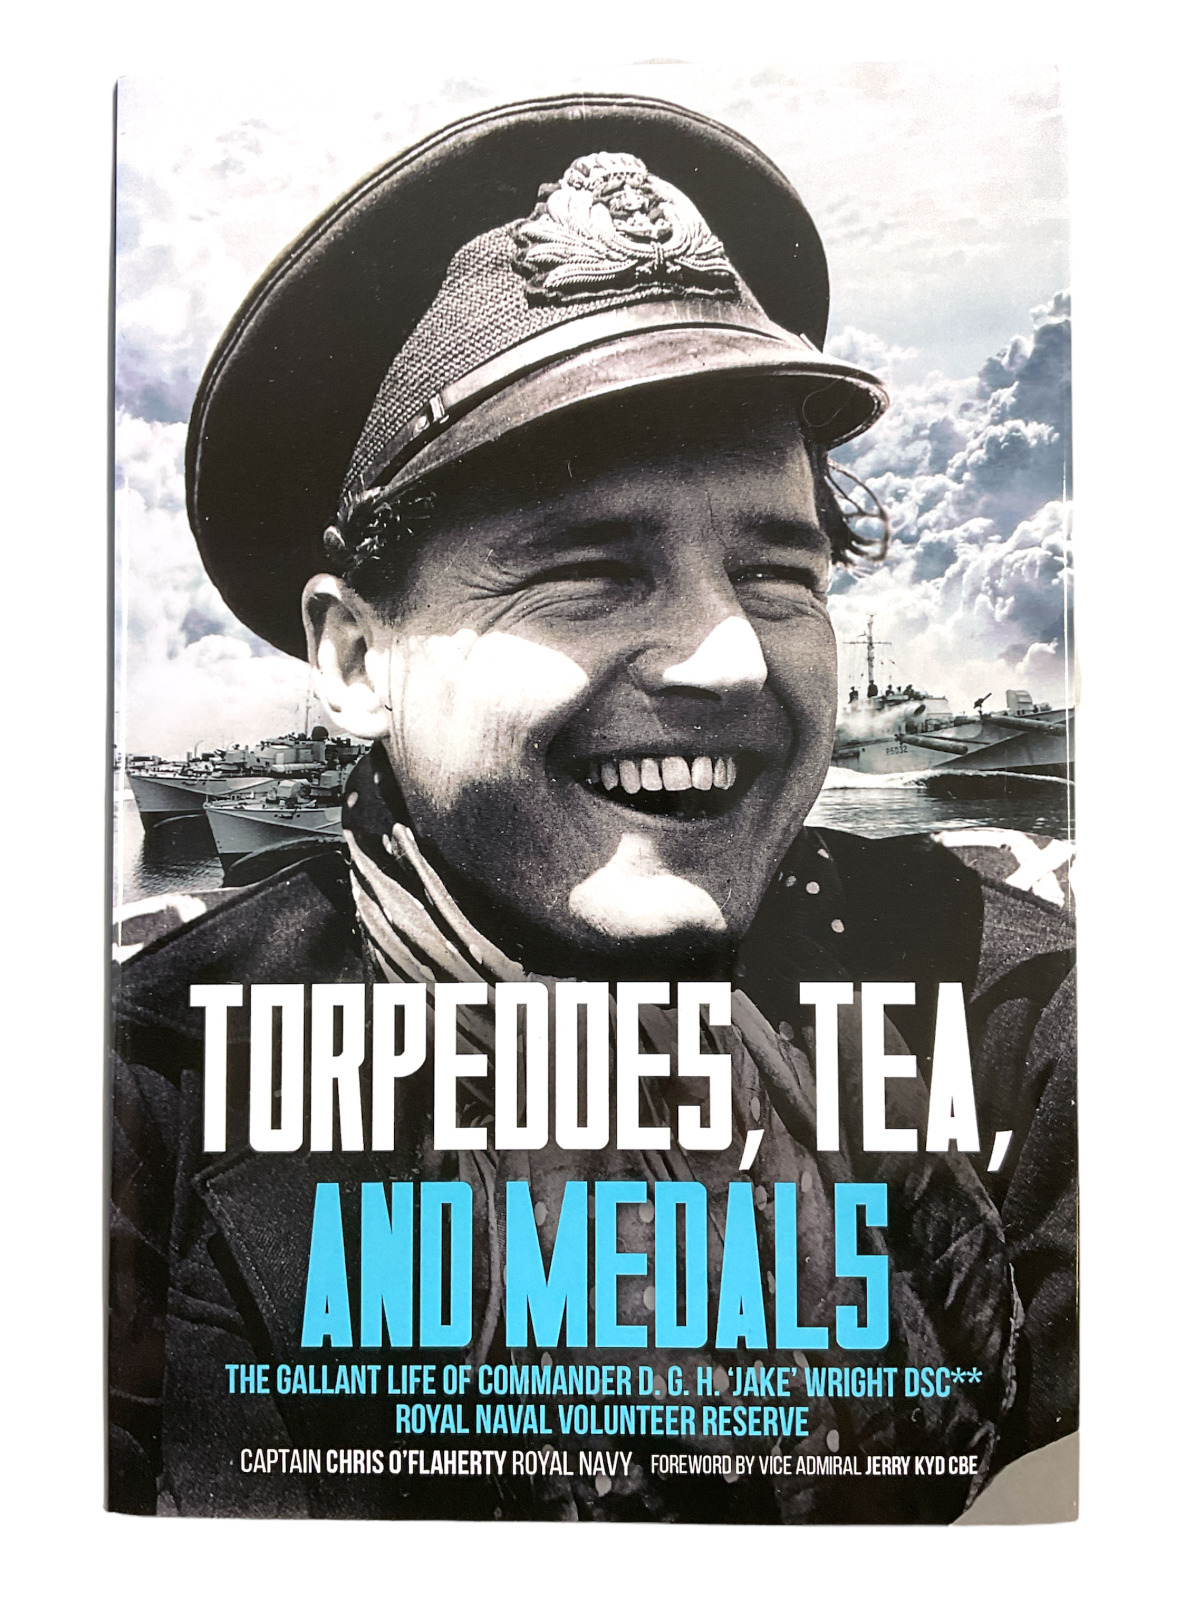 WW2 British RNVR Torpedoes Tea and Medals DGH Wright Hard Cover Reference Book